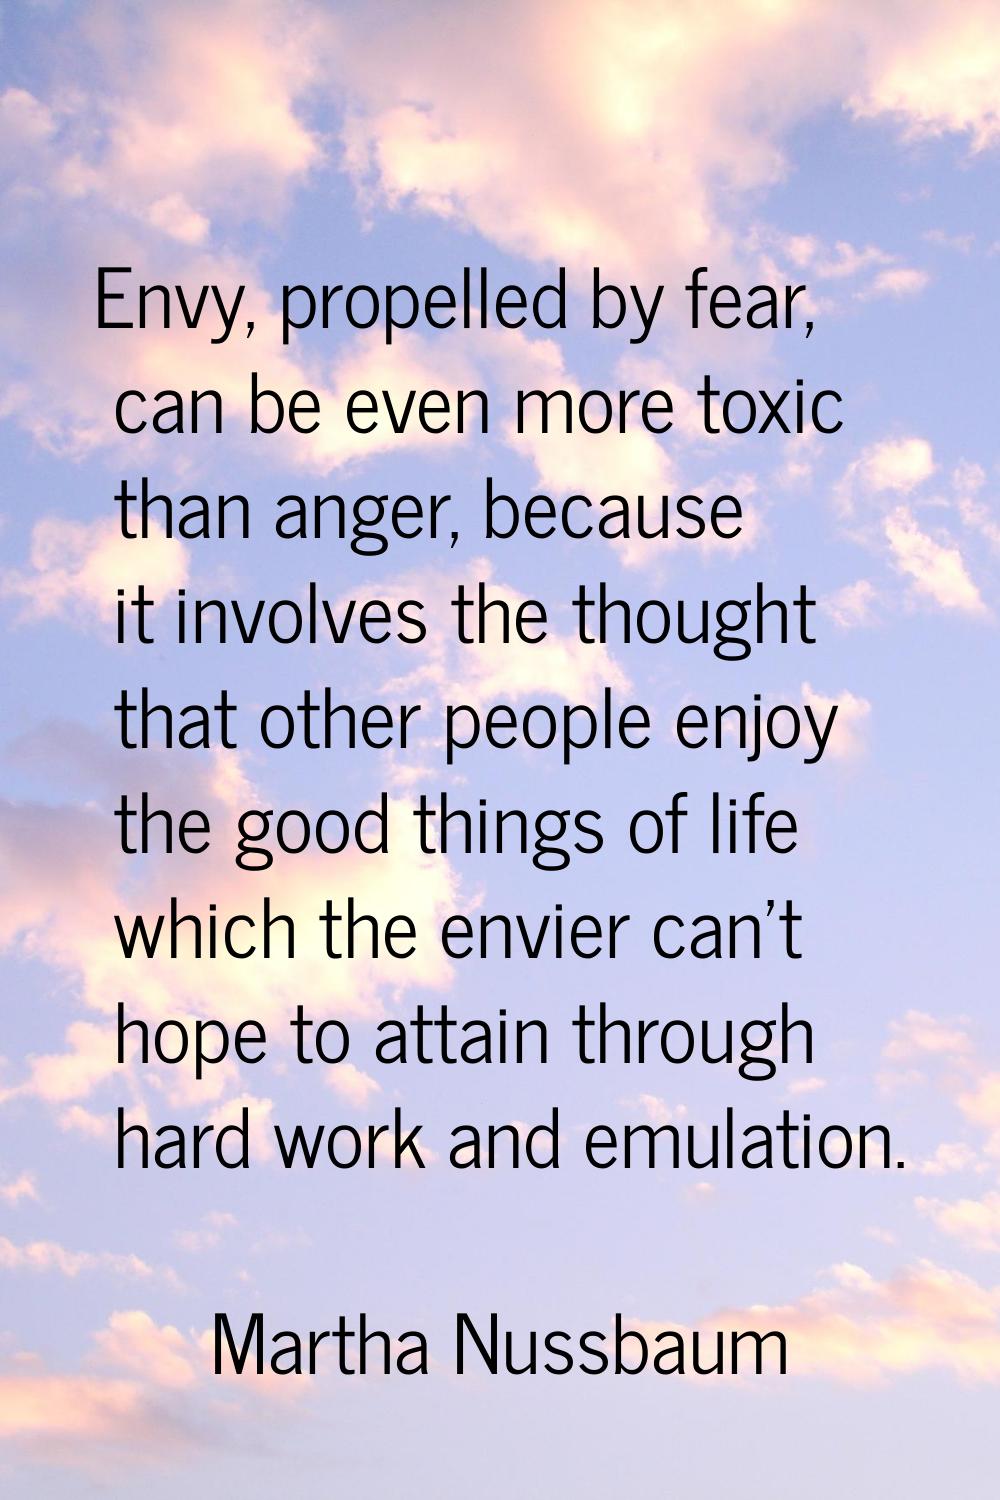 Envy, propelled by fear, can be even more toxic than anger, because it involves the thought that ot